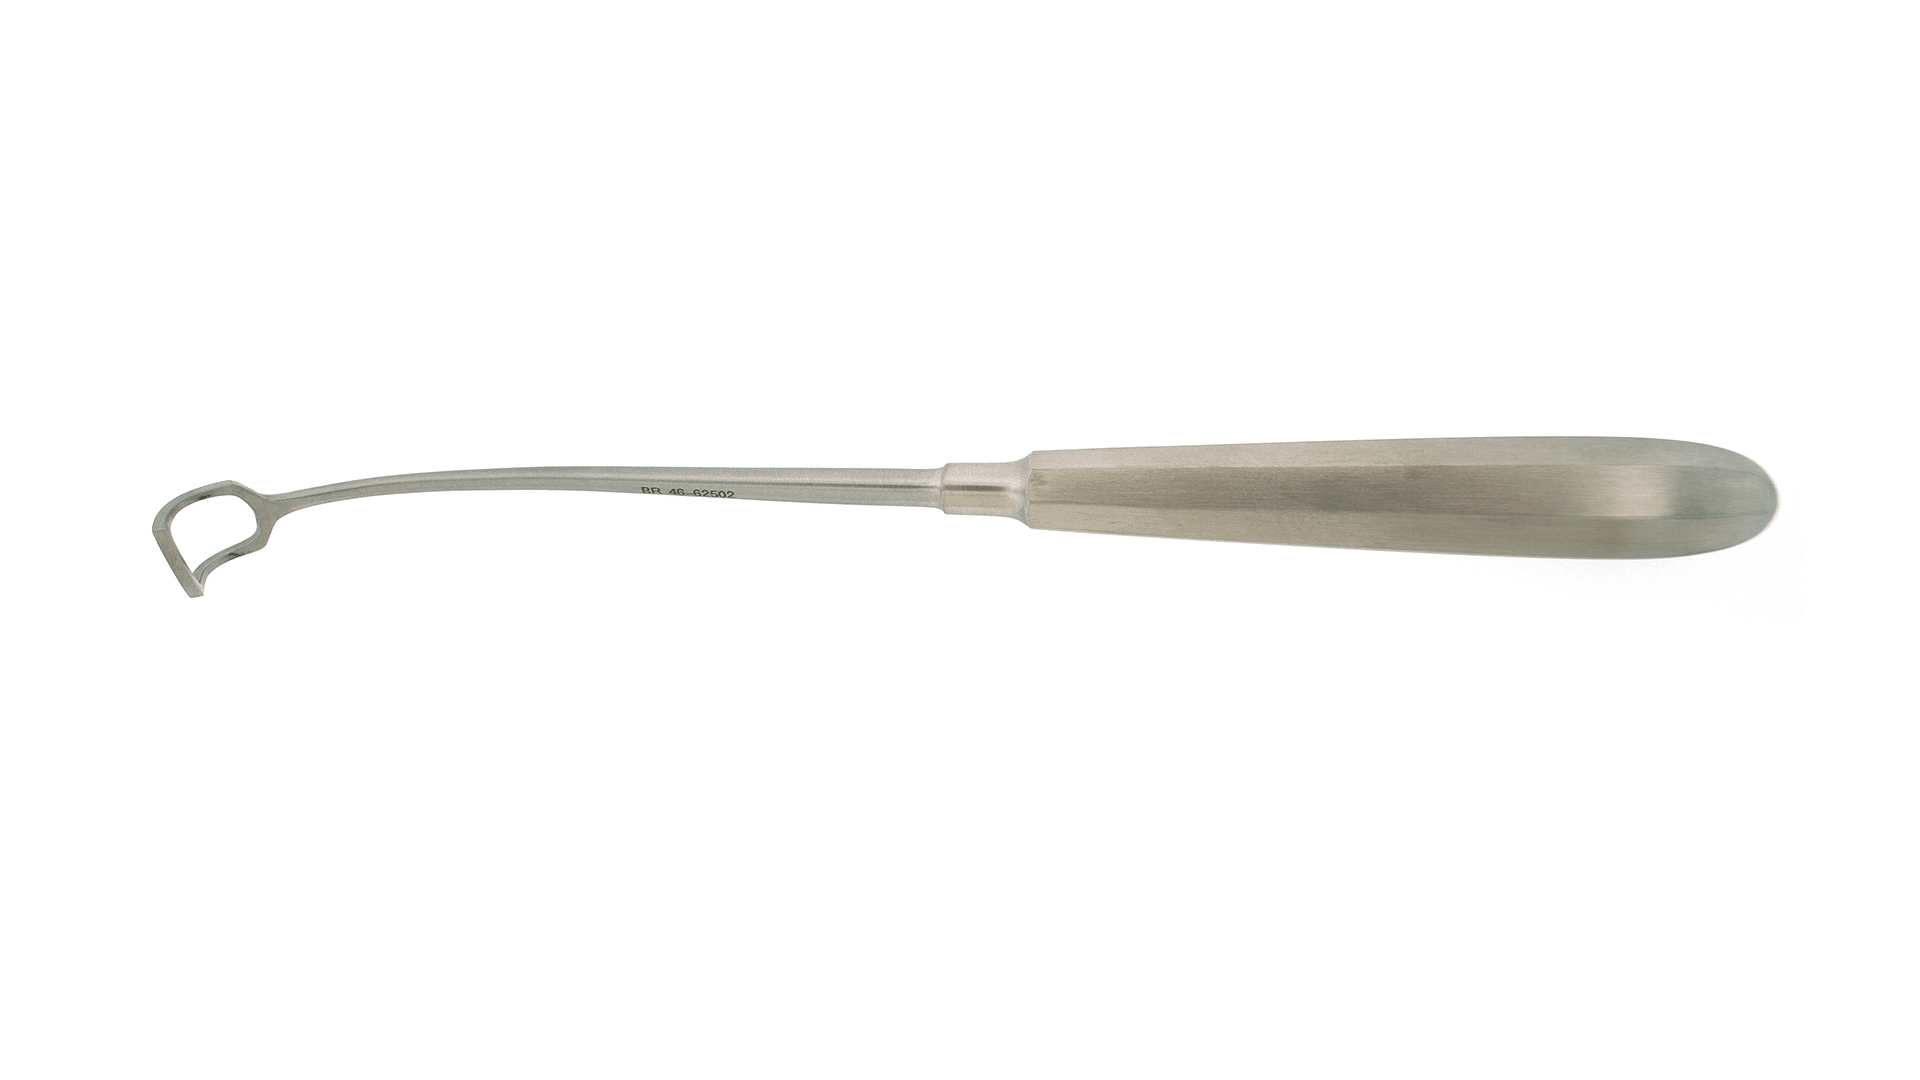 BECKMANN ADENOID CURETTE, CURVED SHAFT, LENGTH 8" 10MM 12MM 14MM 16MM 18MM GERMAN STAINLESS STEEL O.R. GRADE STAINLESS STEEL